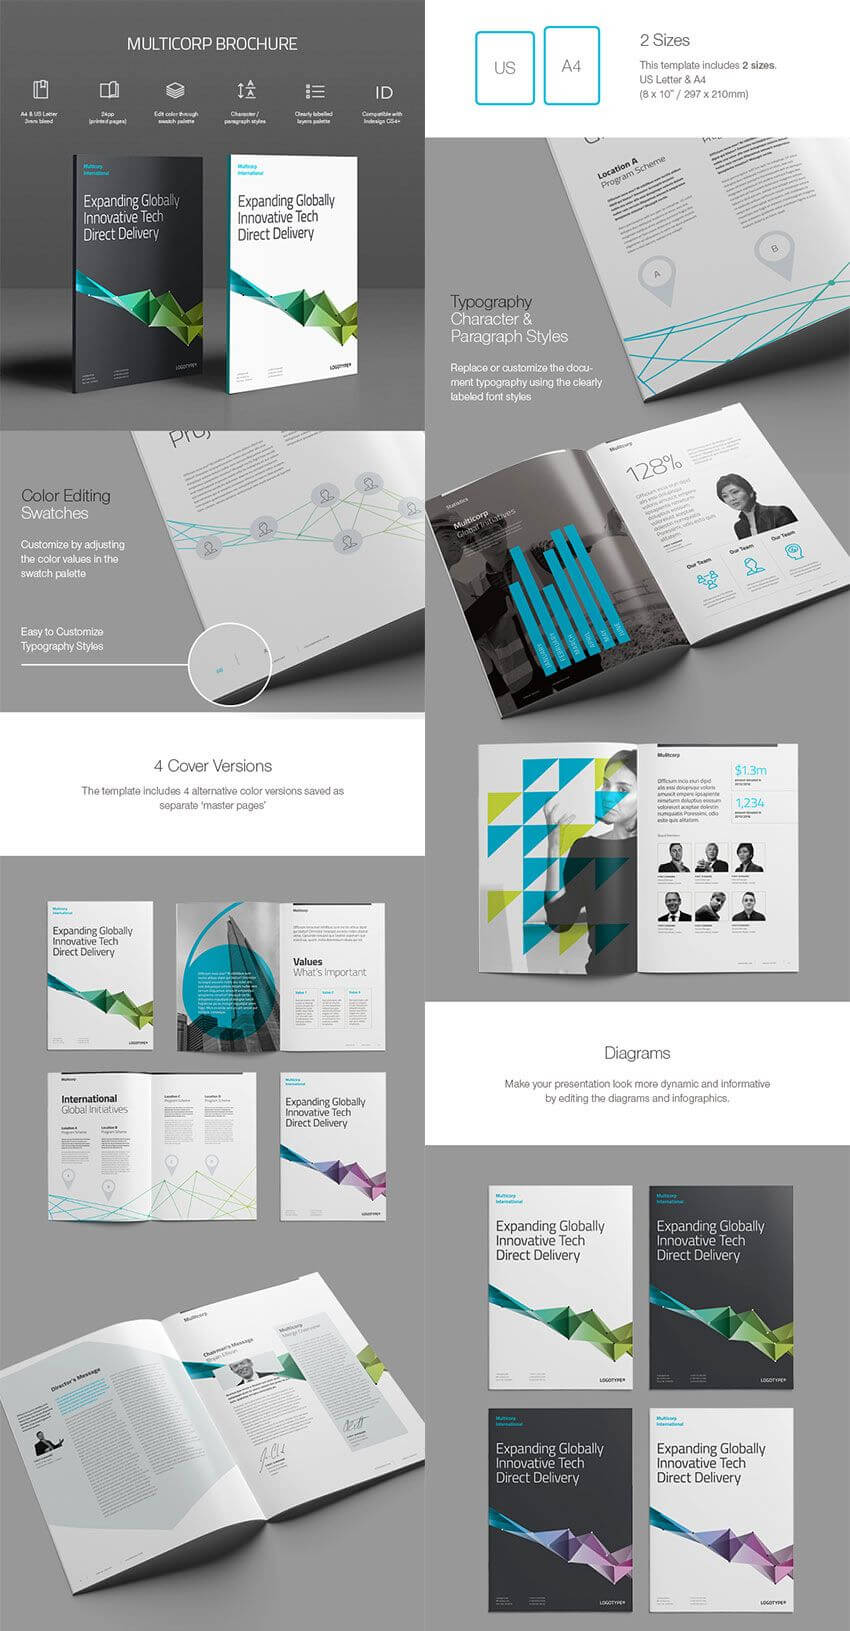 024 Adobe Indesign Flyer Templates Free Download Template Throughout Adobe Indesign Brochure Templates